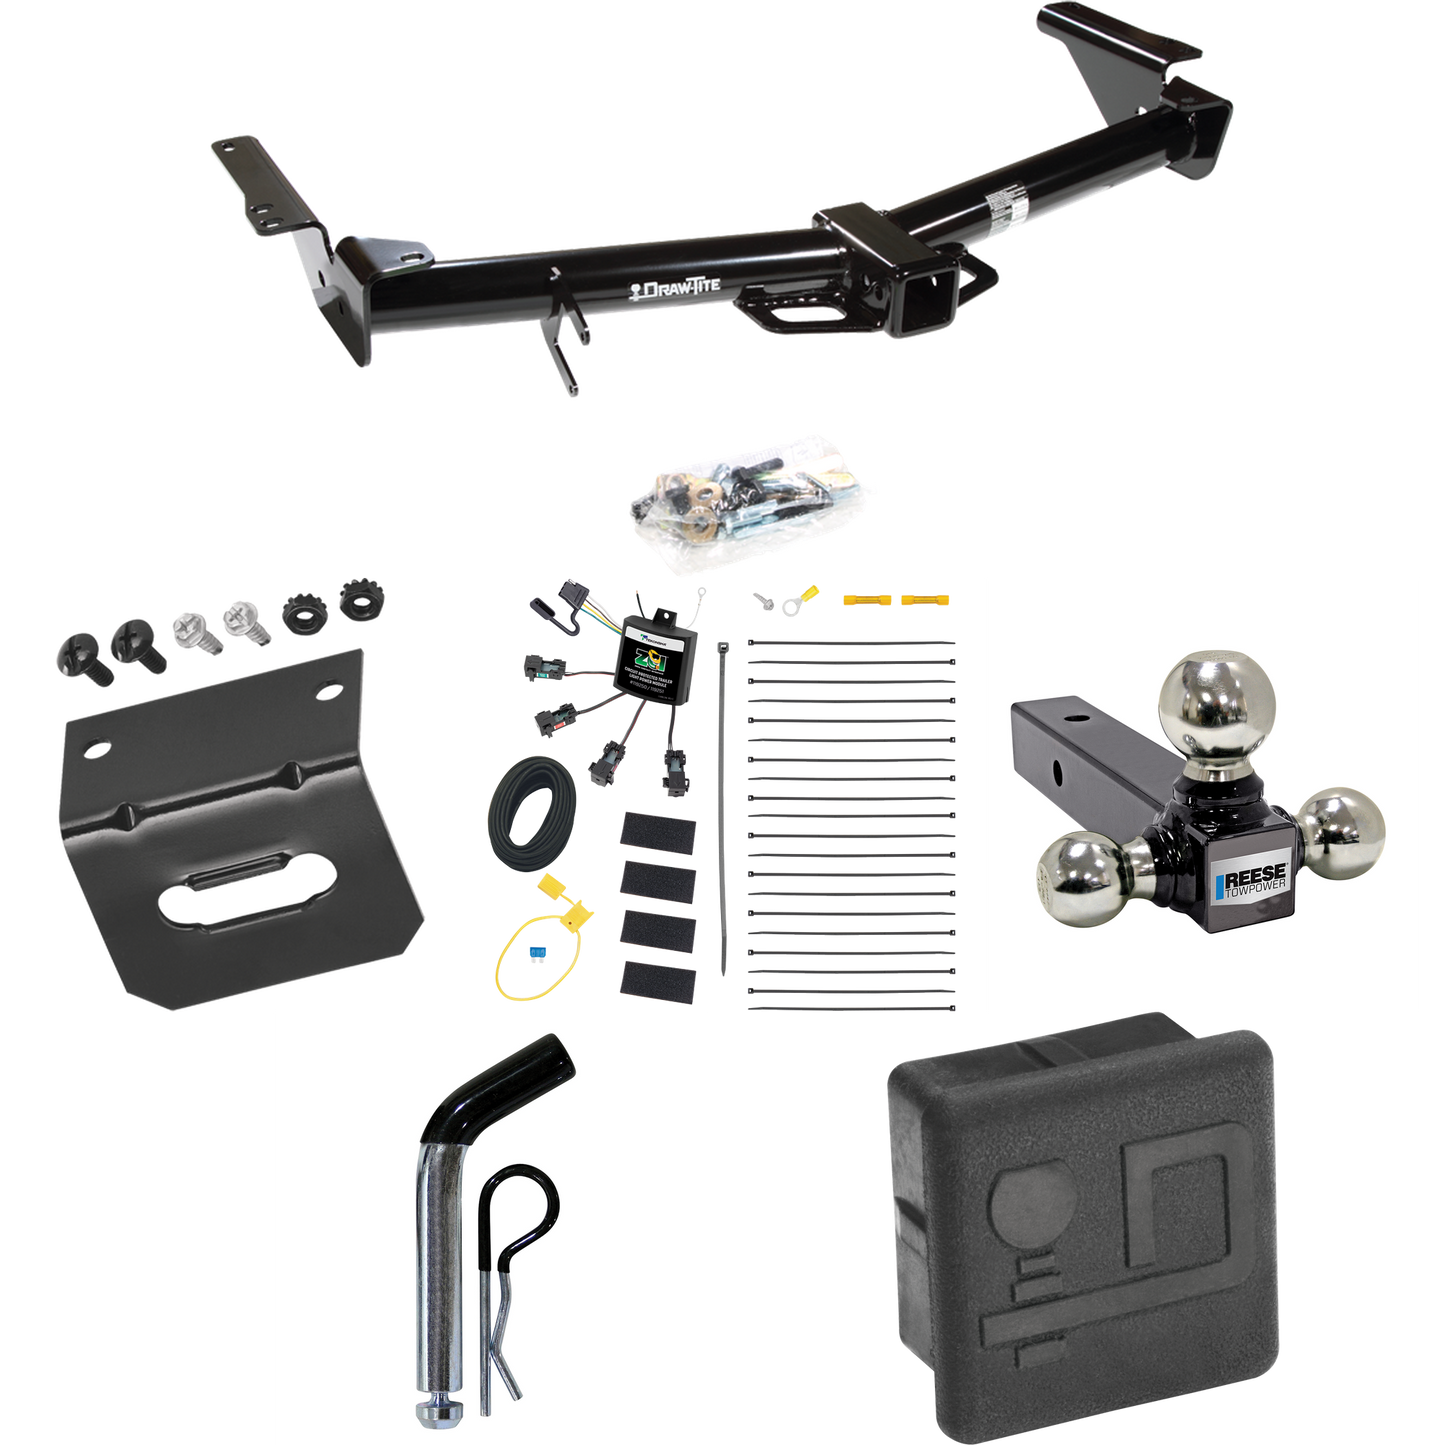 Fits 2007-2009 Toyota 4Runner Trailer Hitch Tow PKG w/ 4-Flat Zero Contact "No Splice" Wiring + Triple Ball Ball Mount 1-7/8" & 2" & 2-5/16" Trailer Balls + Pin/Clip + Wiring Bracket + Hitch Cover By Draw-Tite